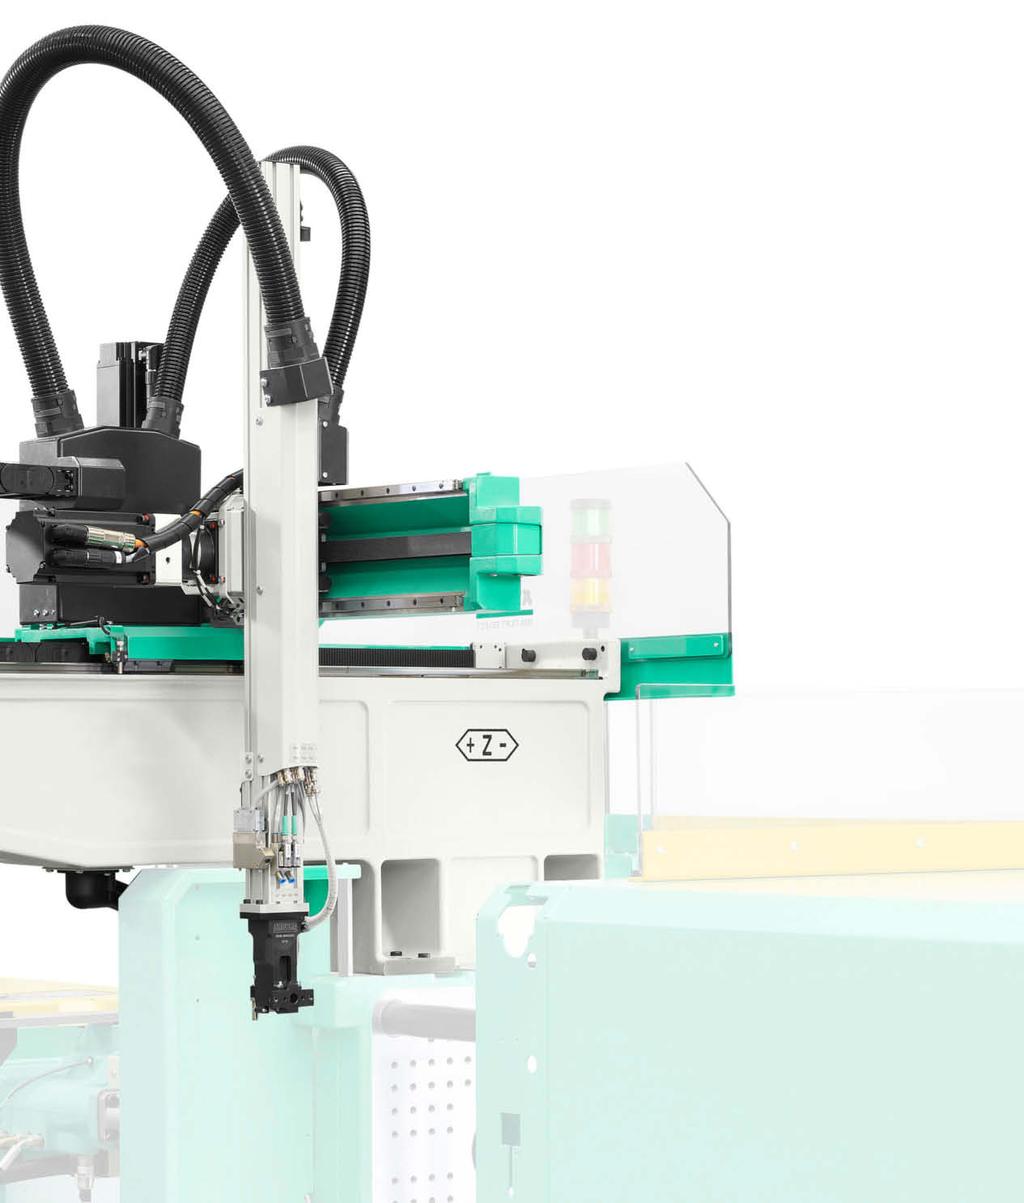 3 Practice-oriented options An additional gripper axis for separate sprue removal or setting down the finished parts